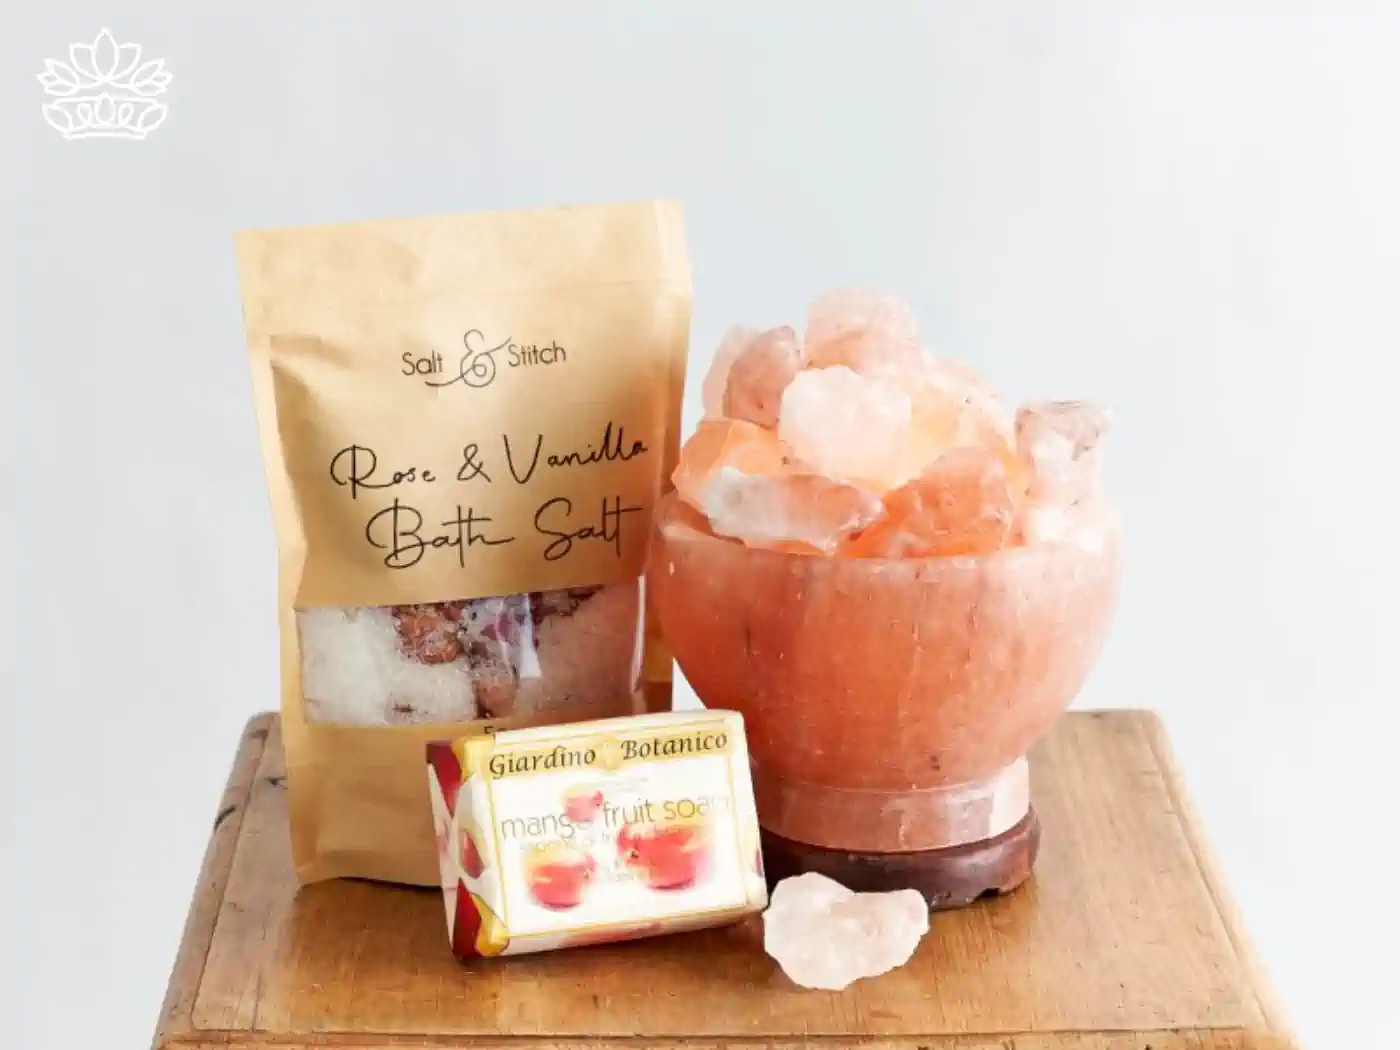 Get well gift box setup featuring Rose & Vanilla bath salt, mango fruit soap, and a Himalayan salt lamp, curated to provide comfort and relaxation. Delivered with Heart. Fabulous Flowers and Gifts.